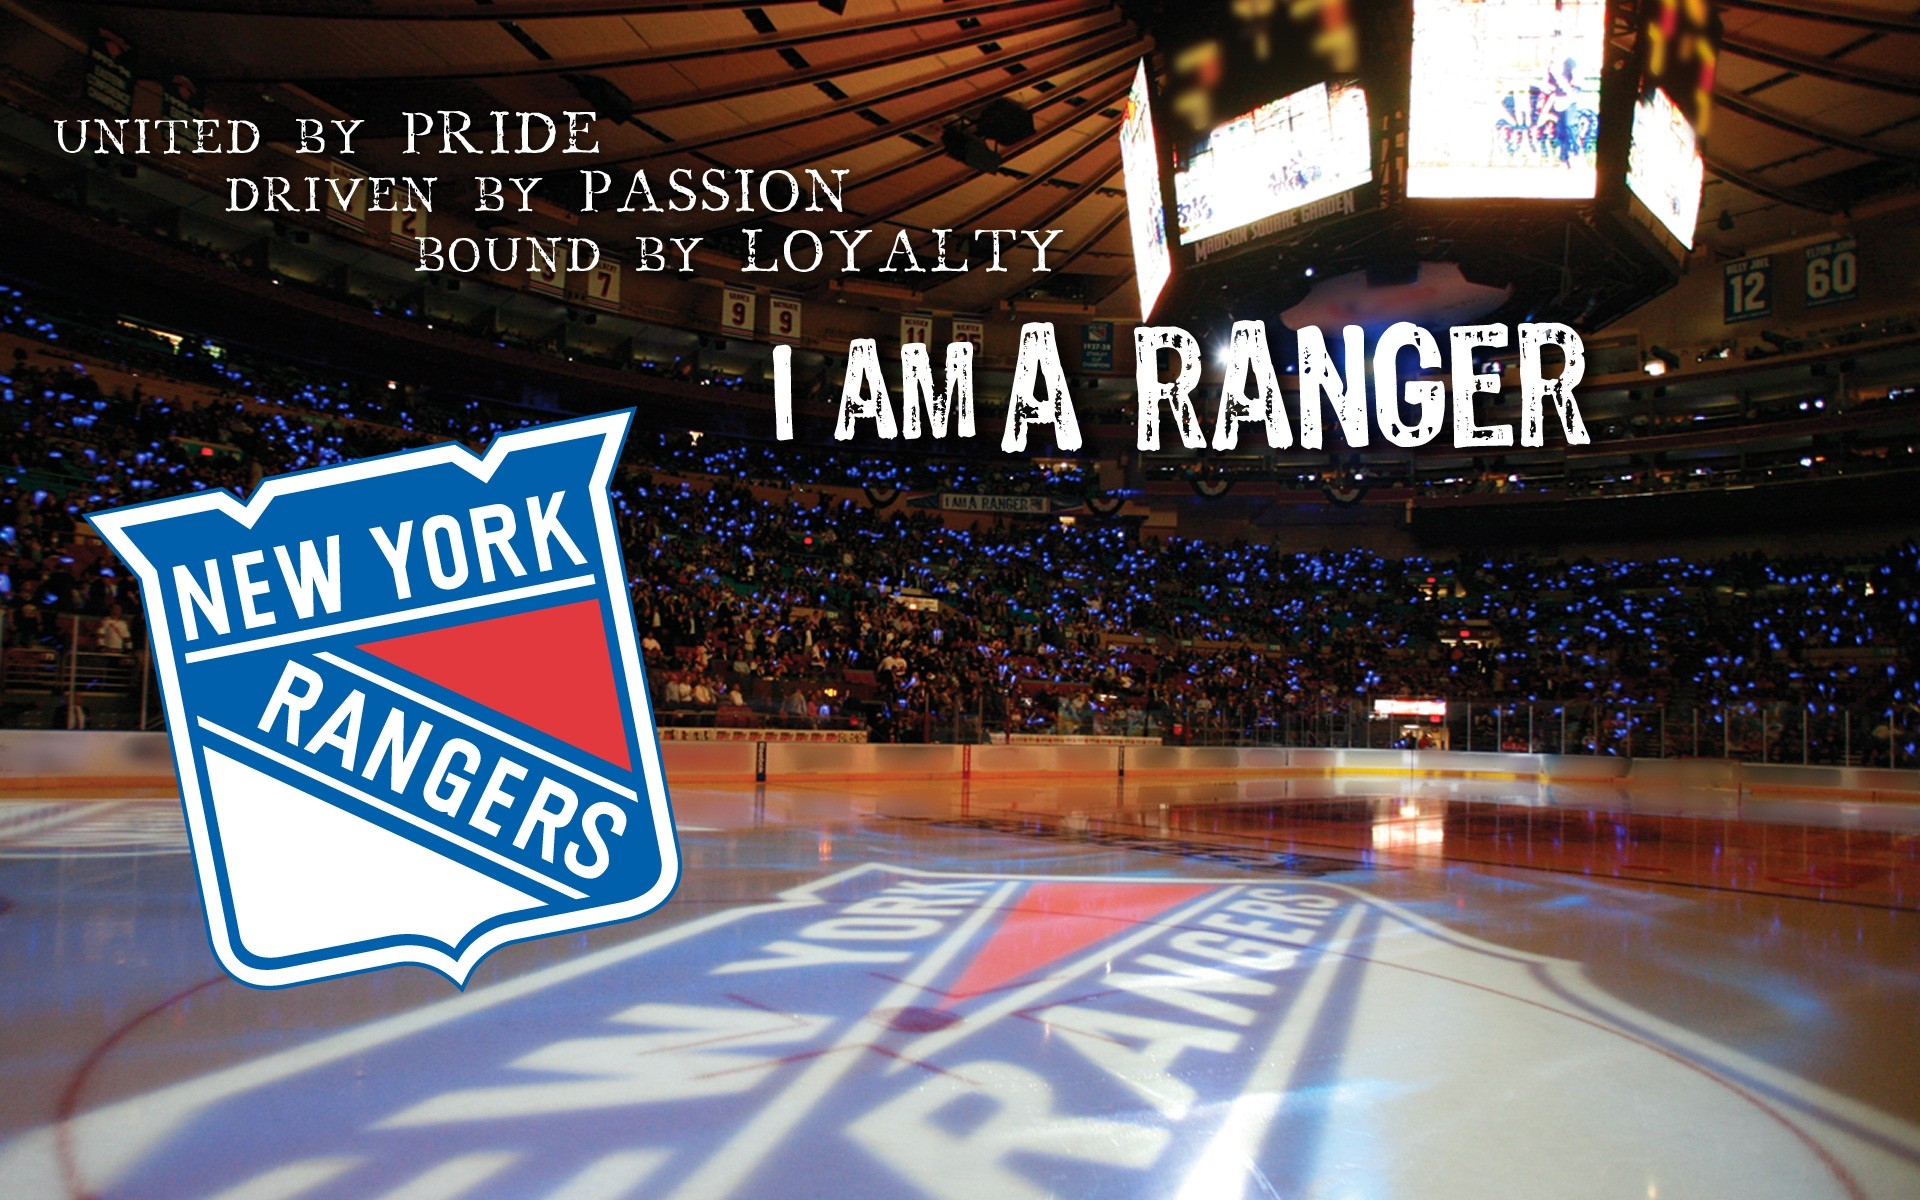 New York Rangers wallpapers for desktop, download free New York Rangers  pictures and backgrounds for PC